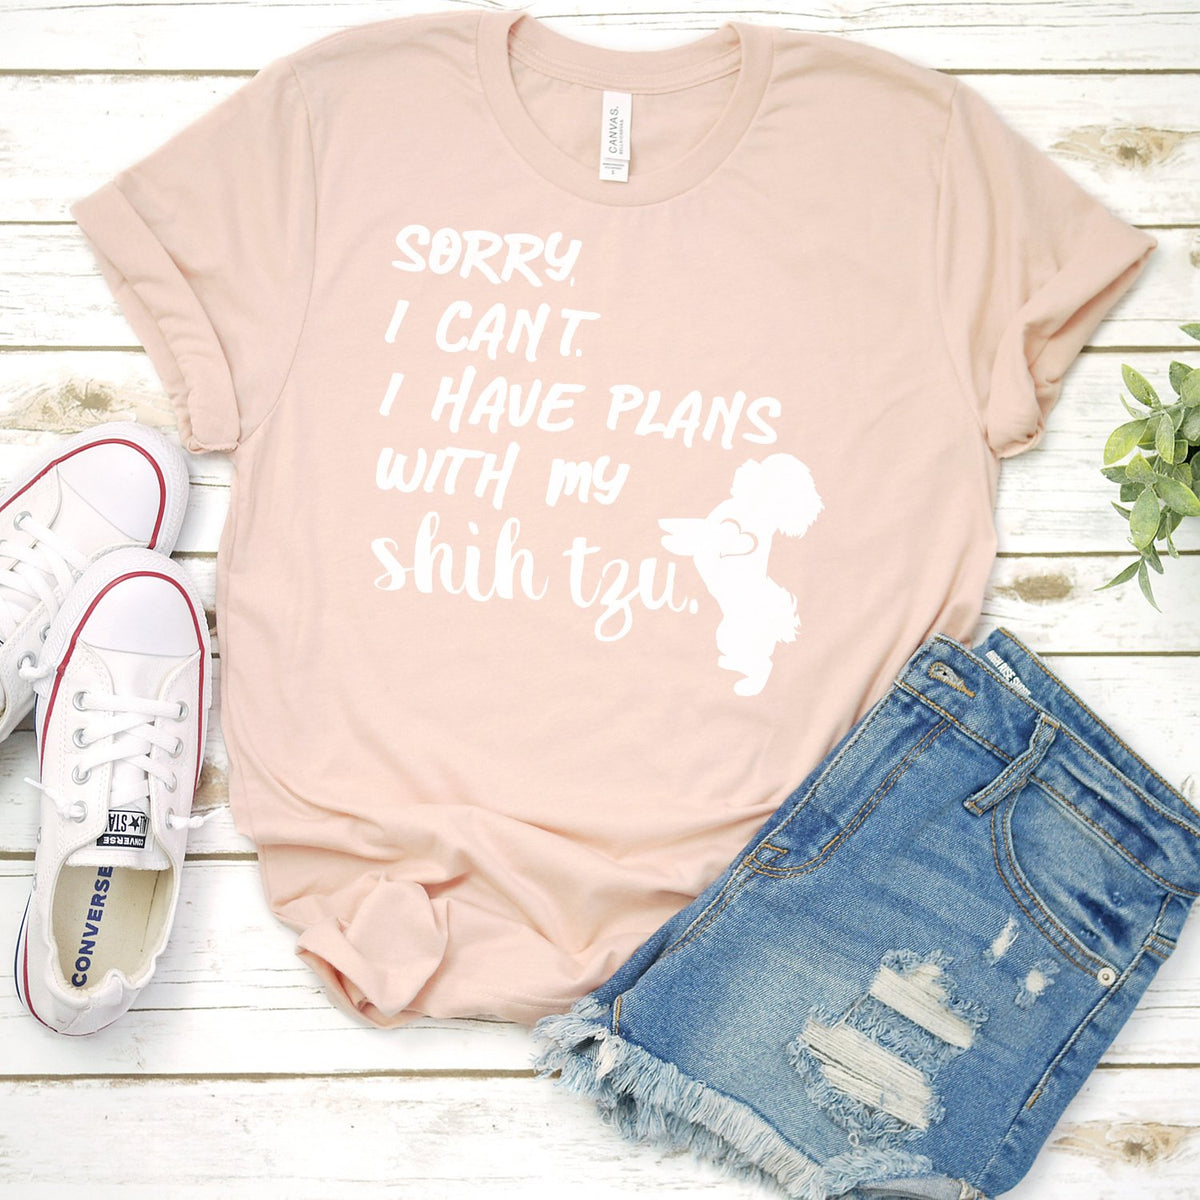 Sorry I Can&#39;t I Have Plans with My Shih Tzu - Short Sleeve Tee Shirt